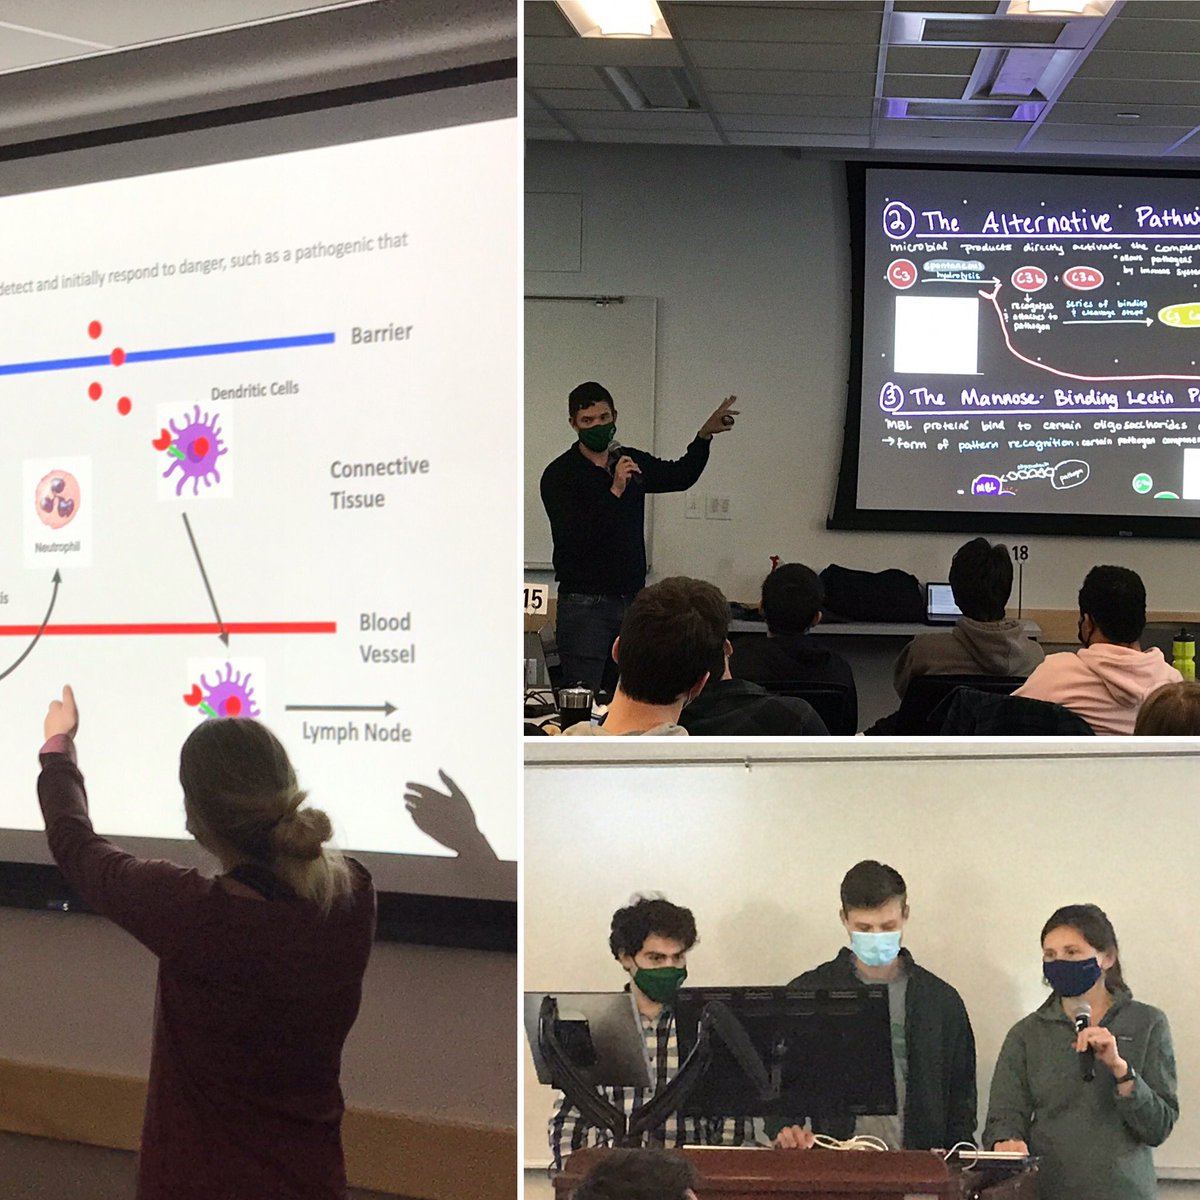 #peerteaching in Medical Immunology with @GeiselMed M1s. It was amazing to see the wonderful presentations and student engagement that happens in peer-to-peer teaching! Thanks to all the students for their excellent work and enthusiasm! @dartmouth